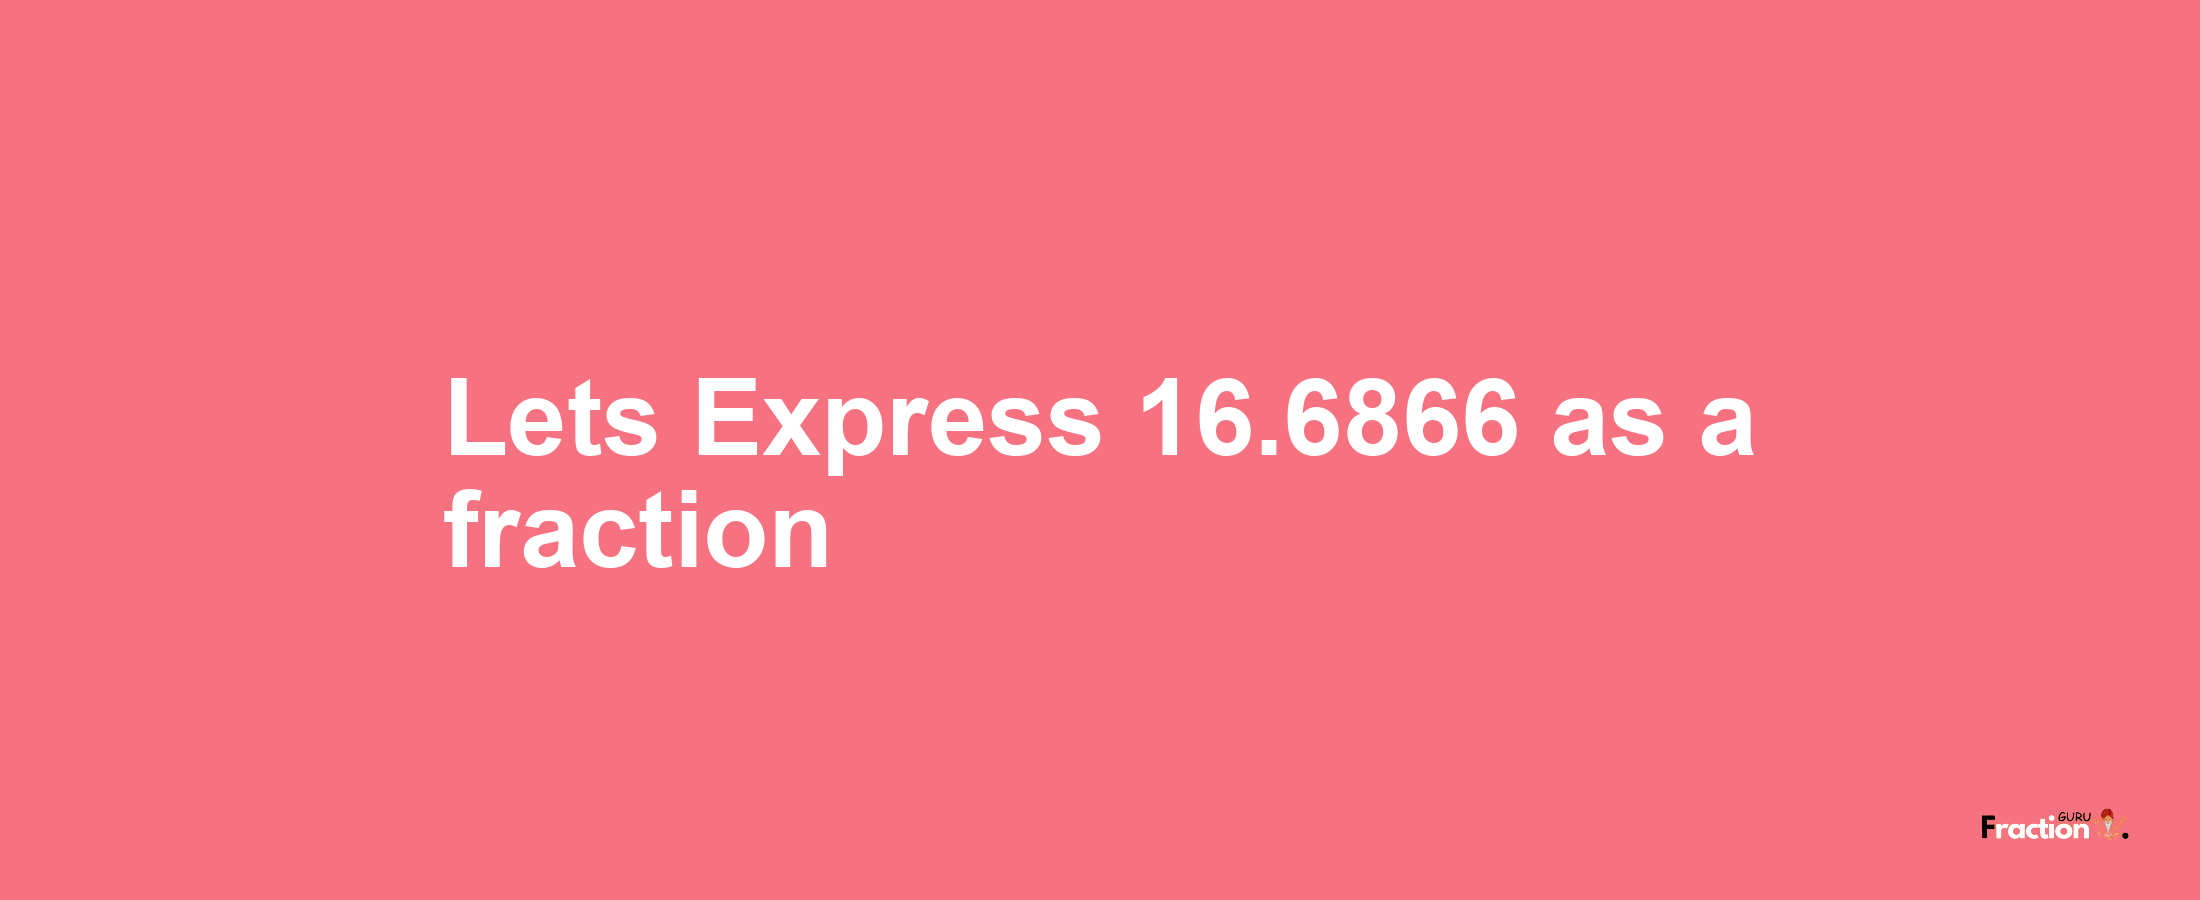 Lets Express 16.6866 as afraction